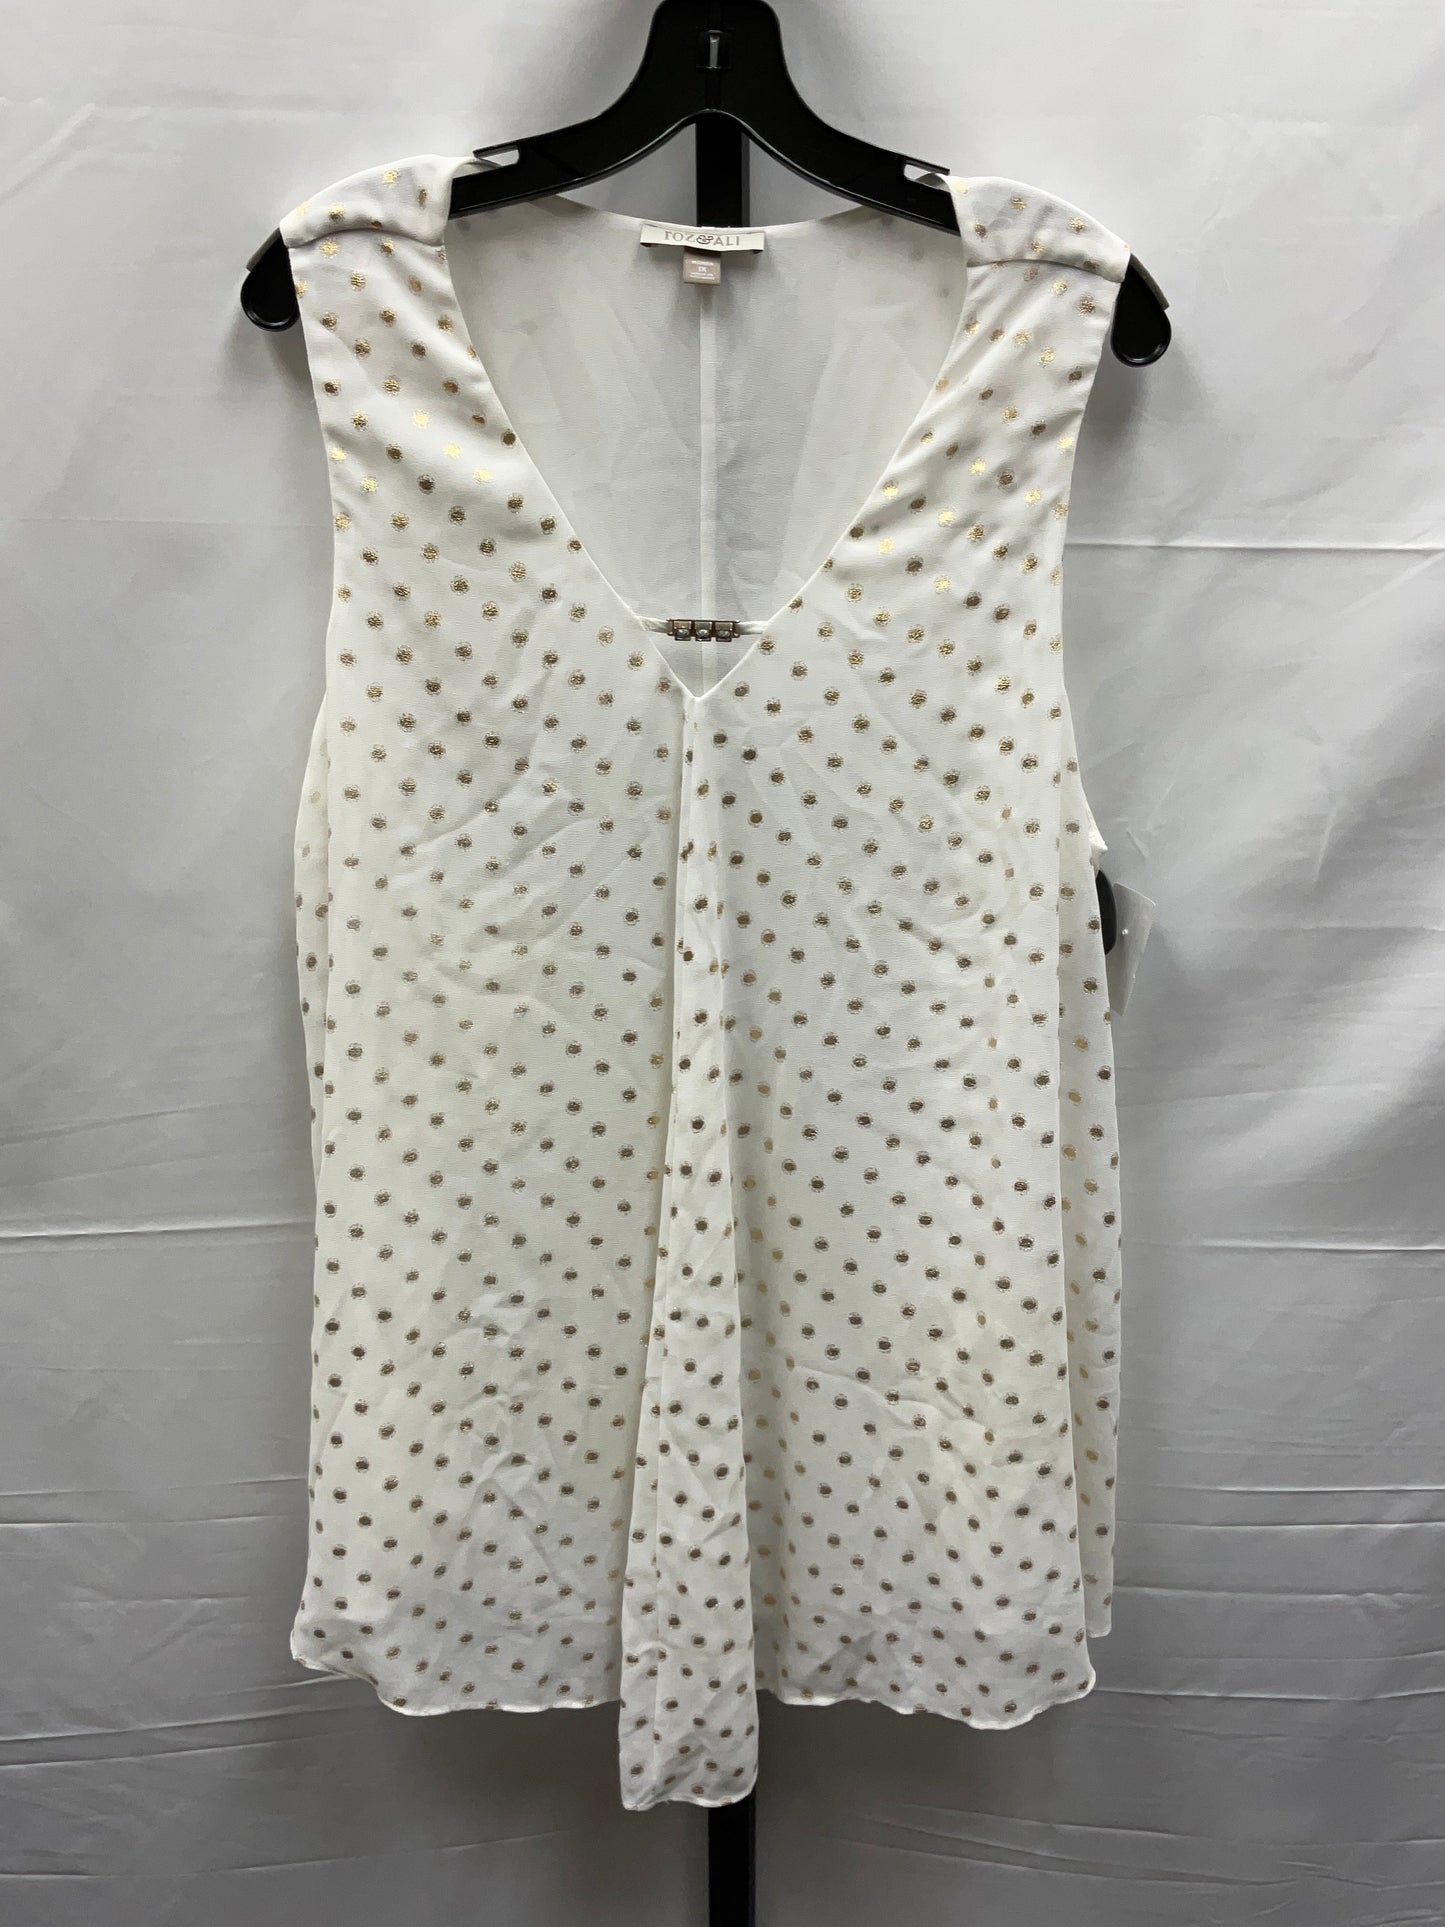 Gold & White Top Sleeveless Roz And Ali, Size 1x